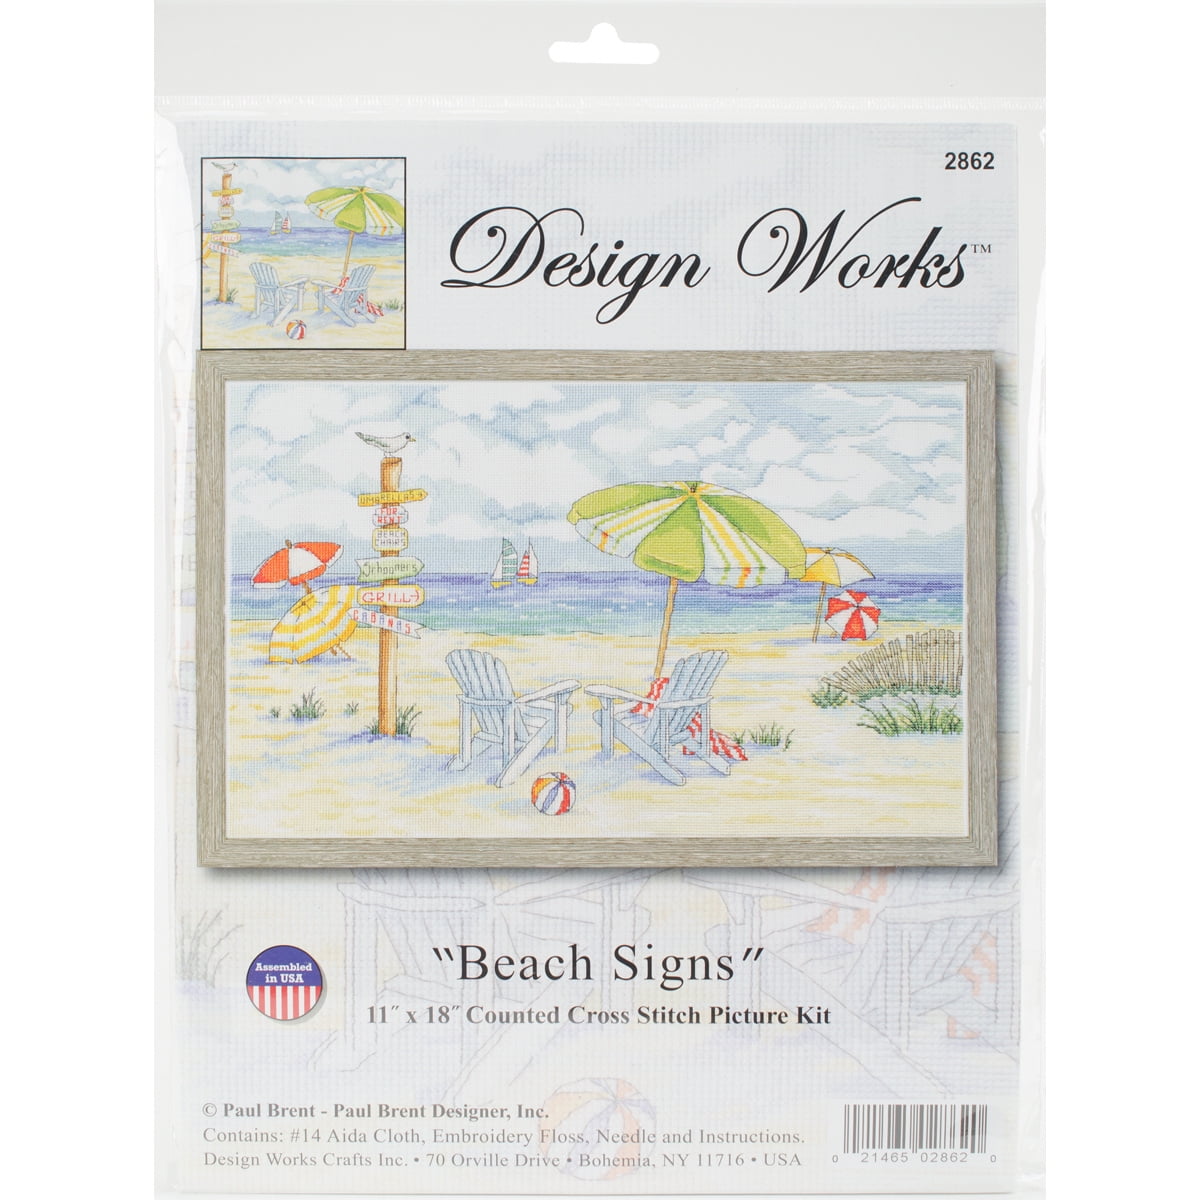 Beach Signs Counted Cross Stitch Kit, 11